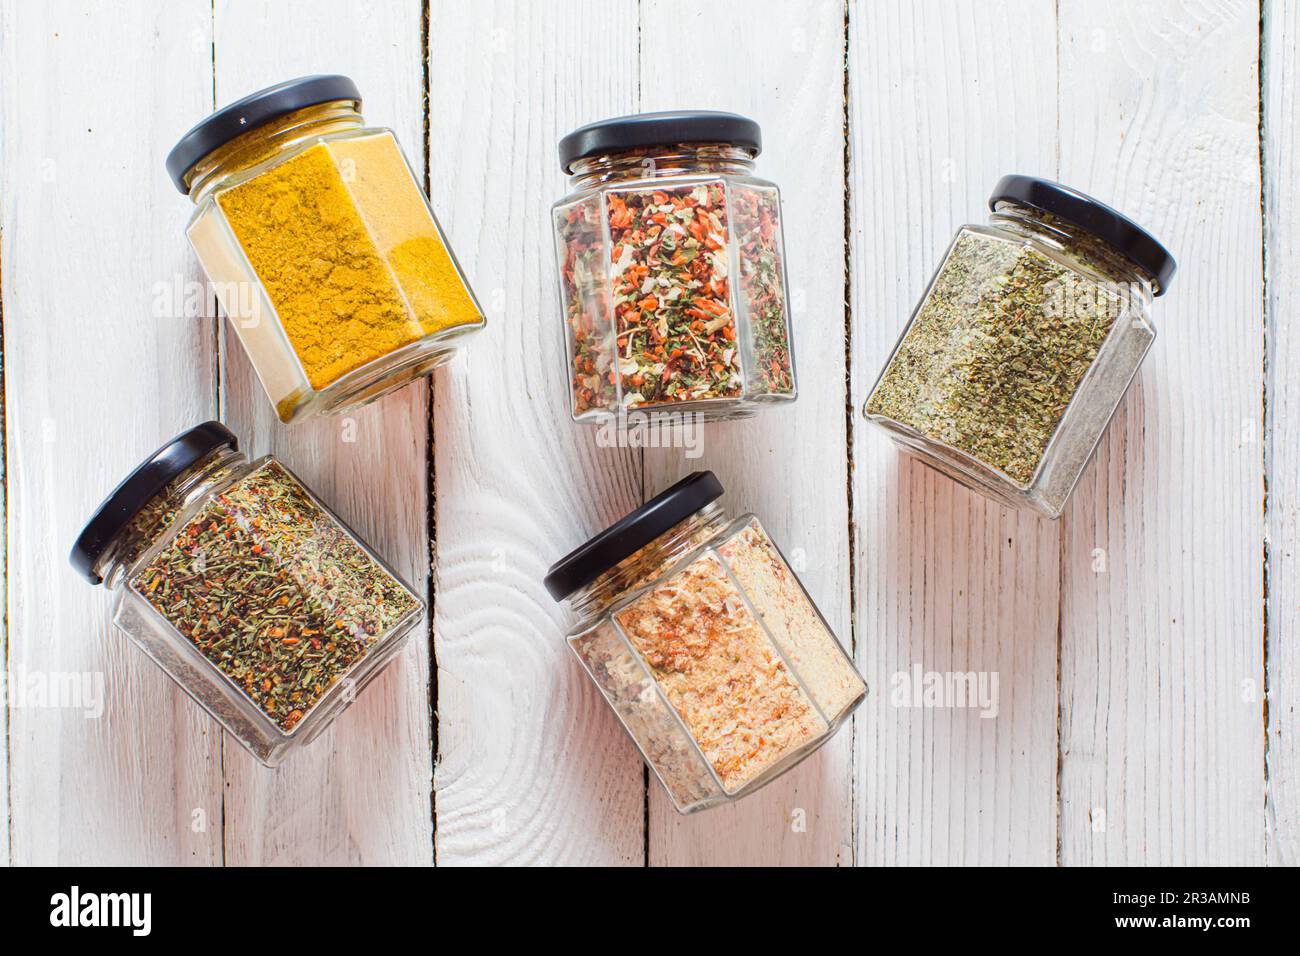 https://c8.alamy.com/comp/2R3AMNB/jars-with-various-spices-and-herbs-overhead-on-white-wooden-background-2R3AMNB.jpg